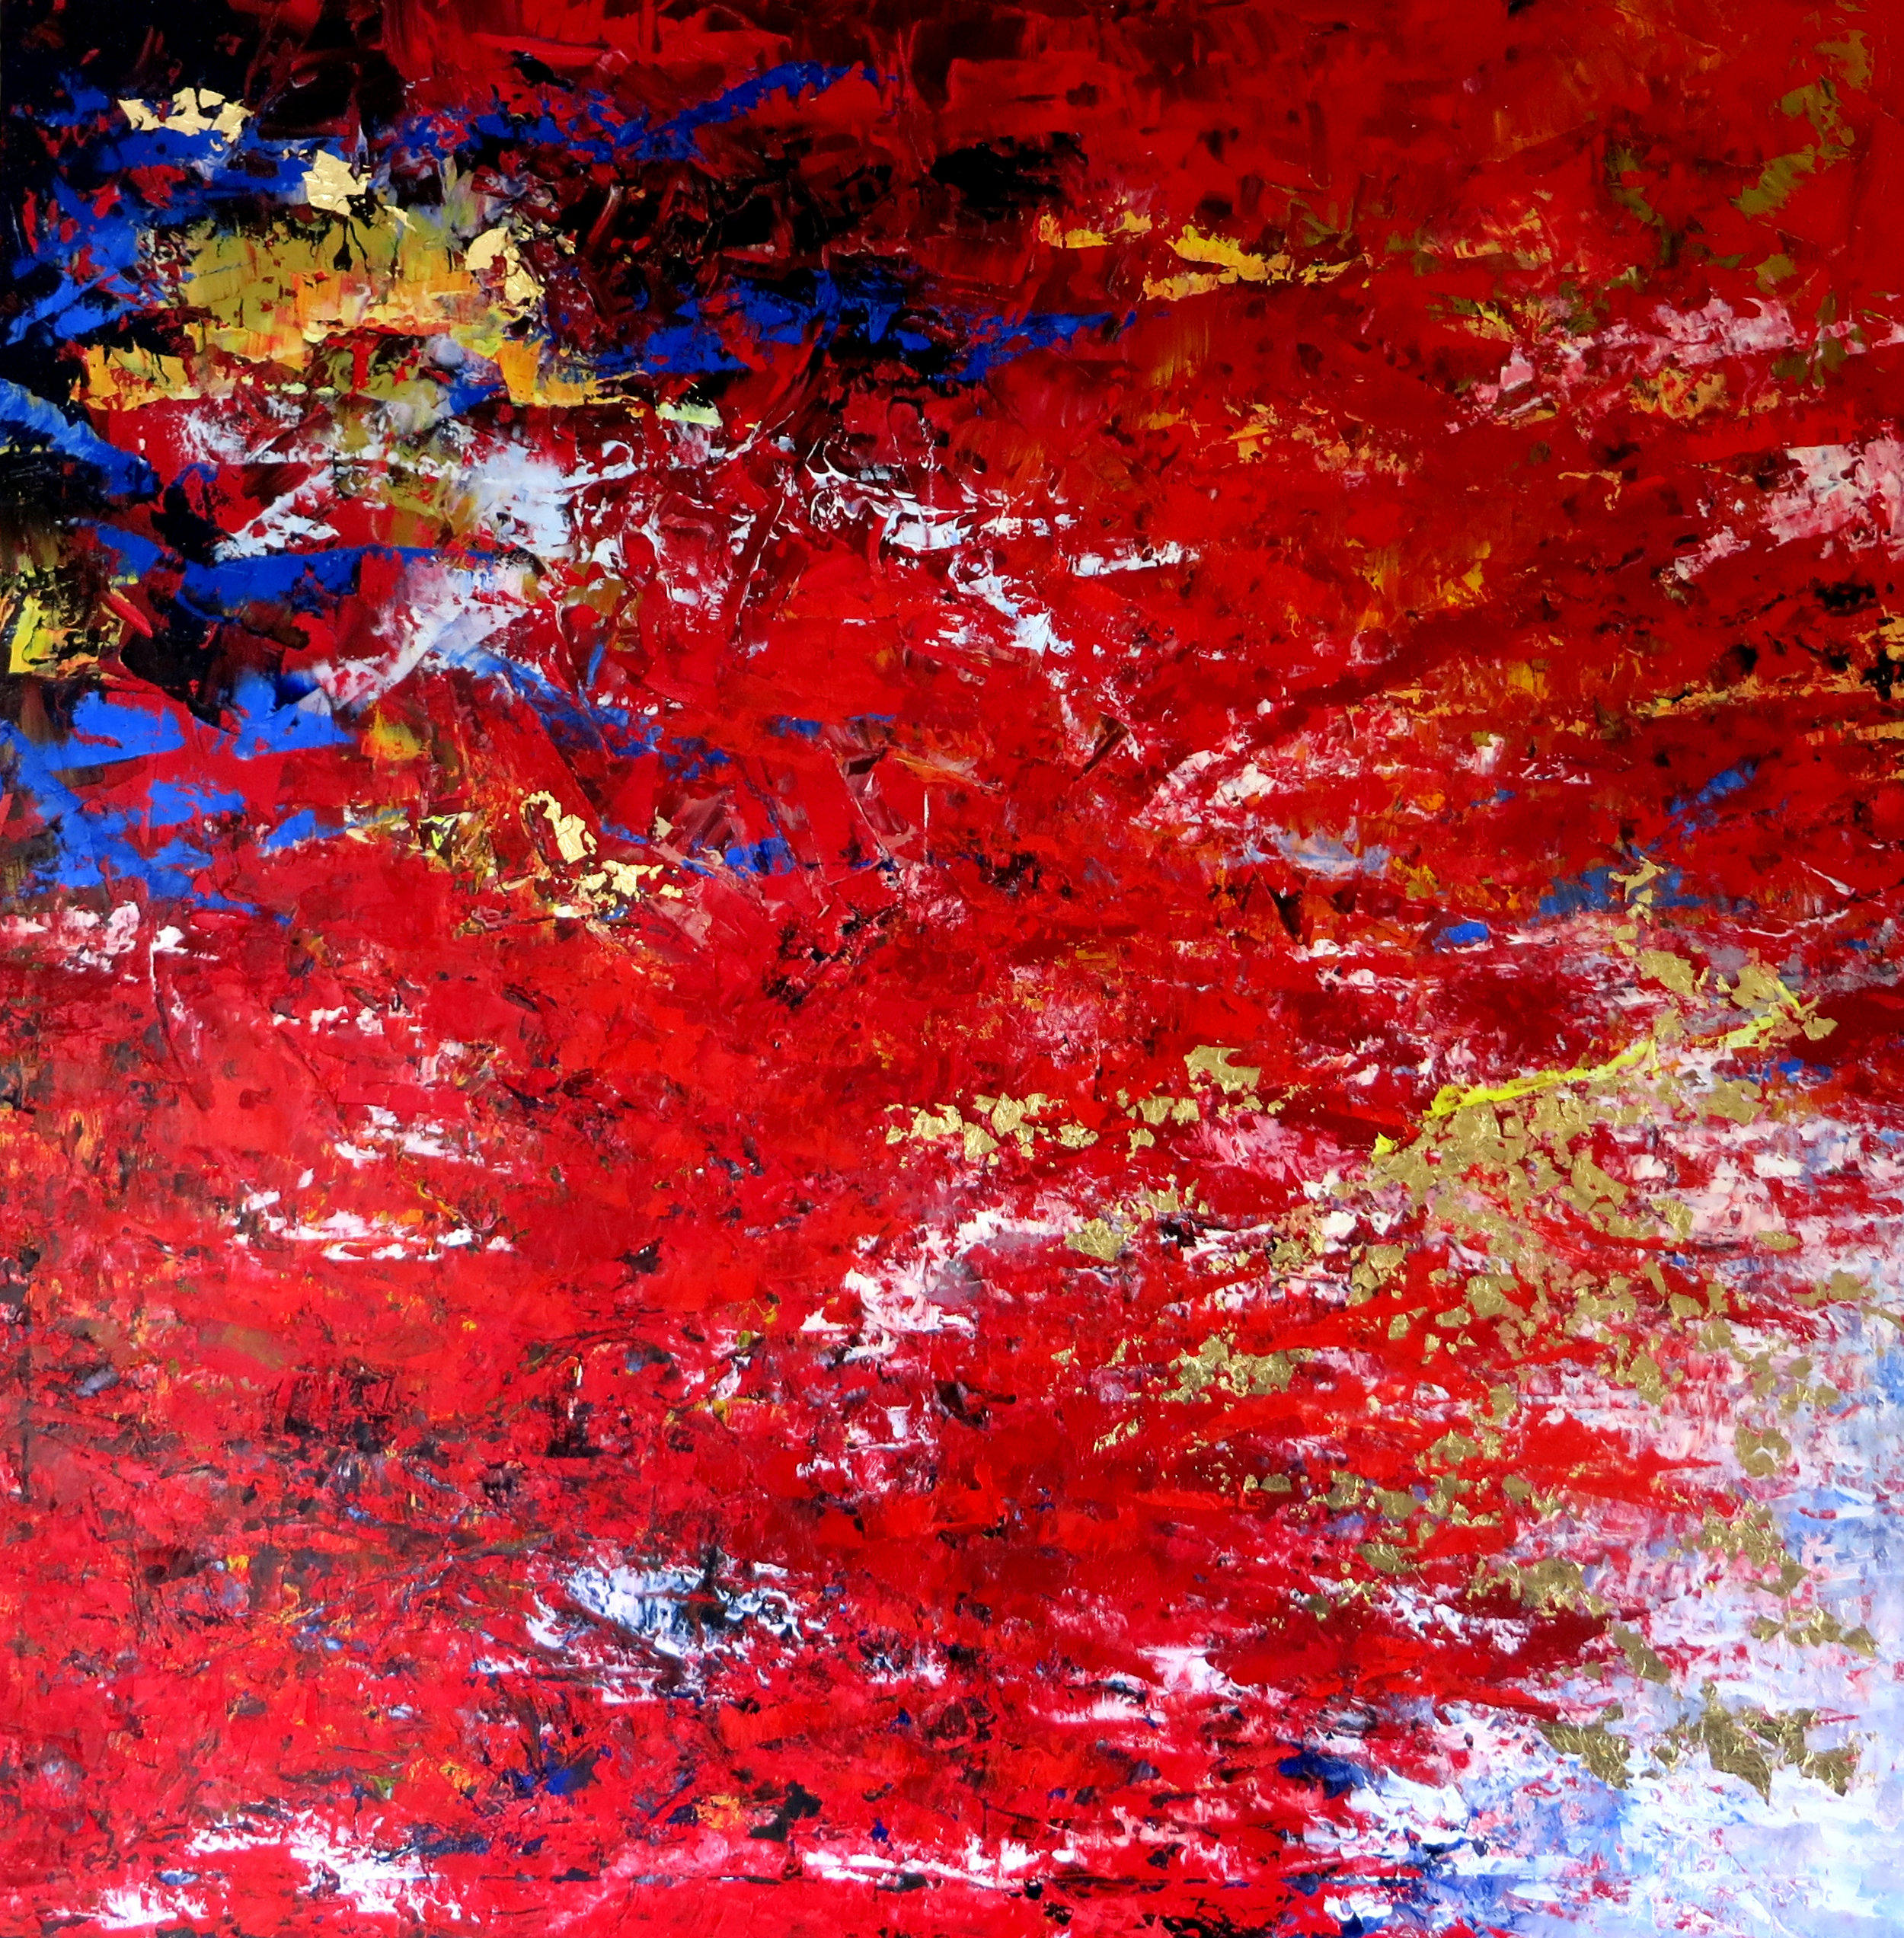 ‘Untitled Red - Transitions’